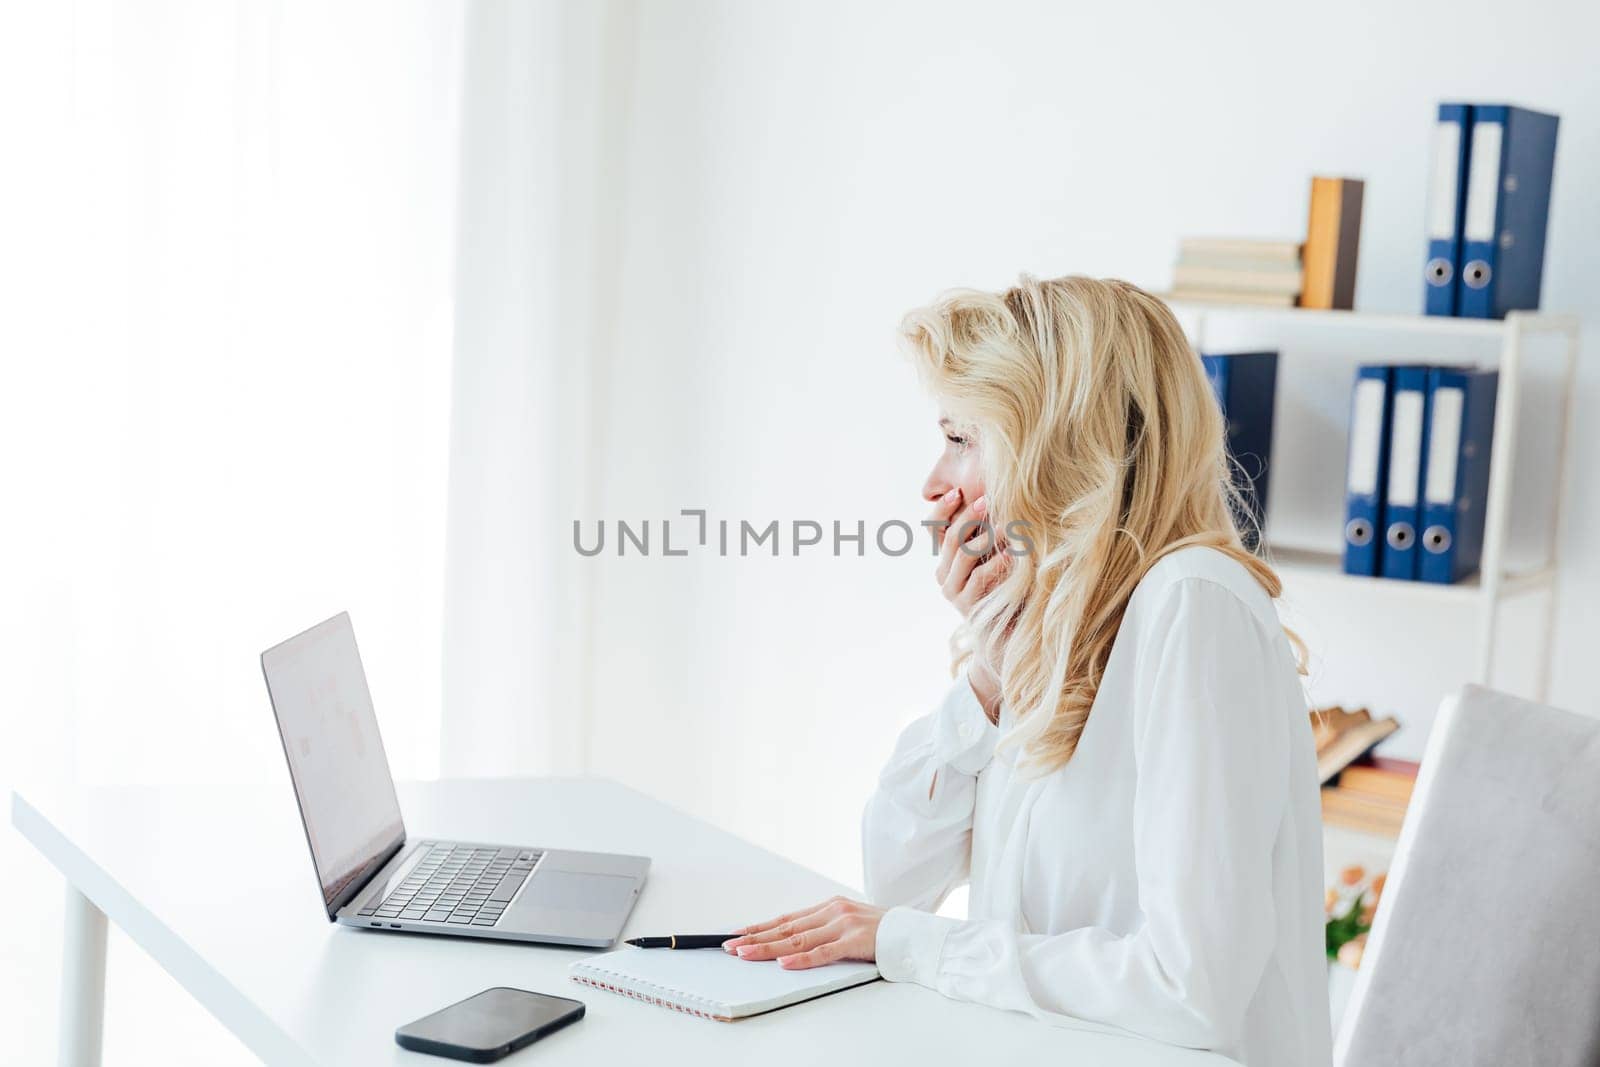 woman at computer in office at work